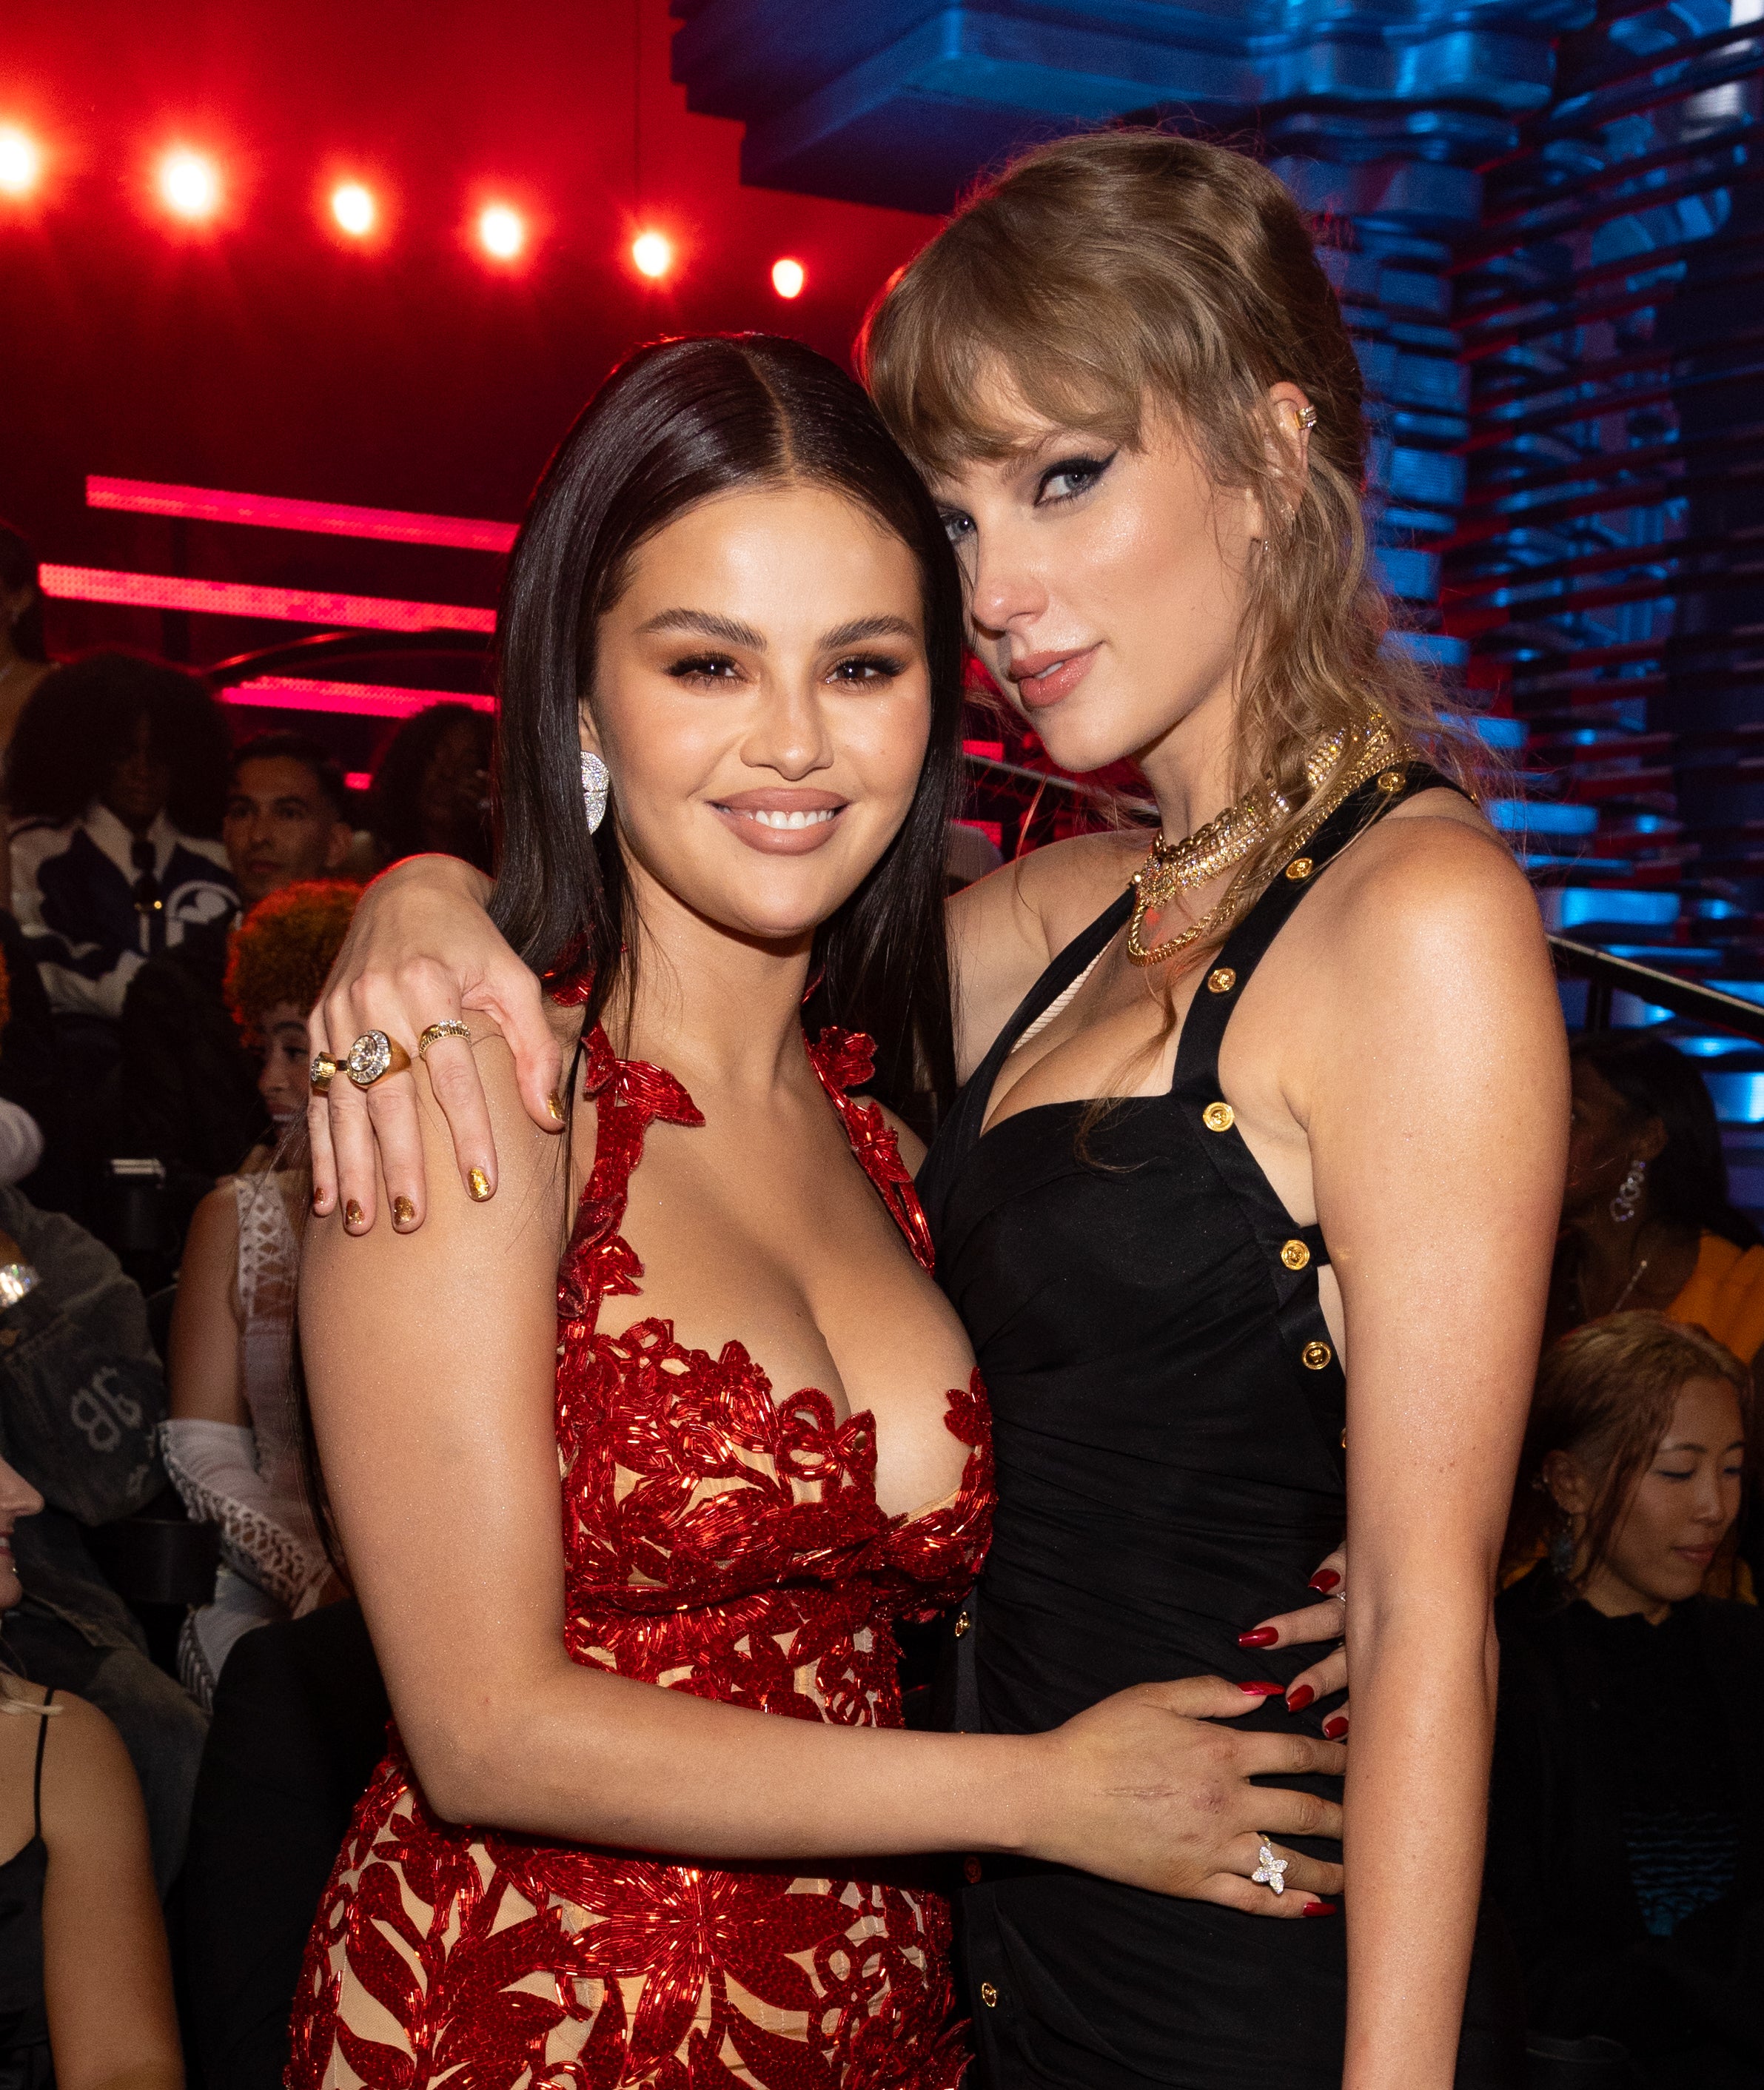 Selena and Taylor with their arms around each other as they smile for a photo at an awards show